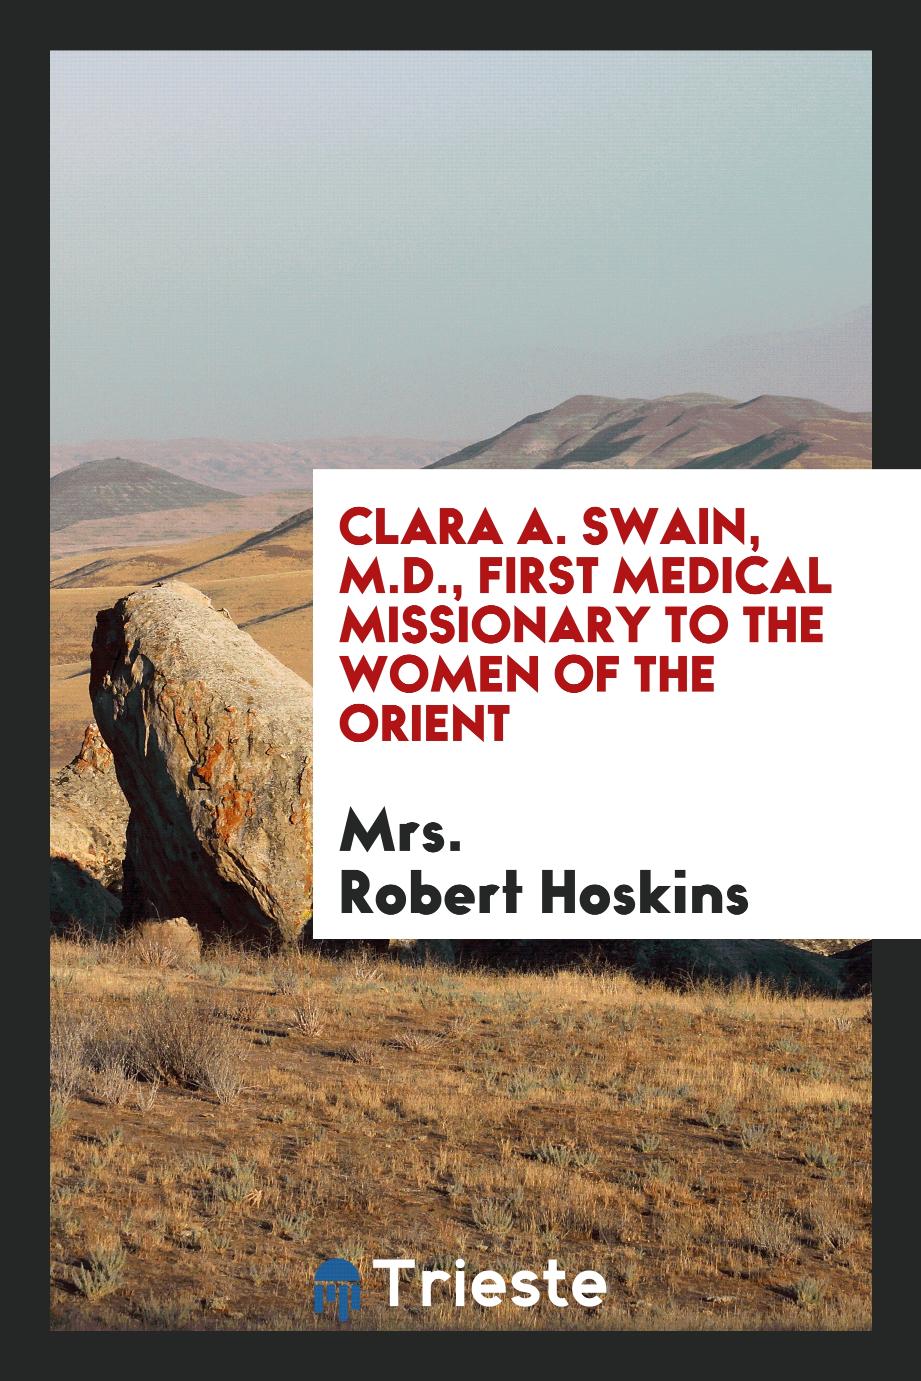 Clara A. Swain, M.D., first medical missionary to the women of the Orient